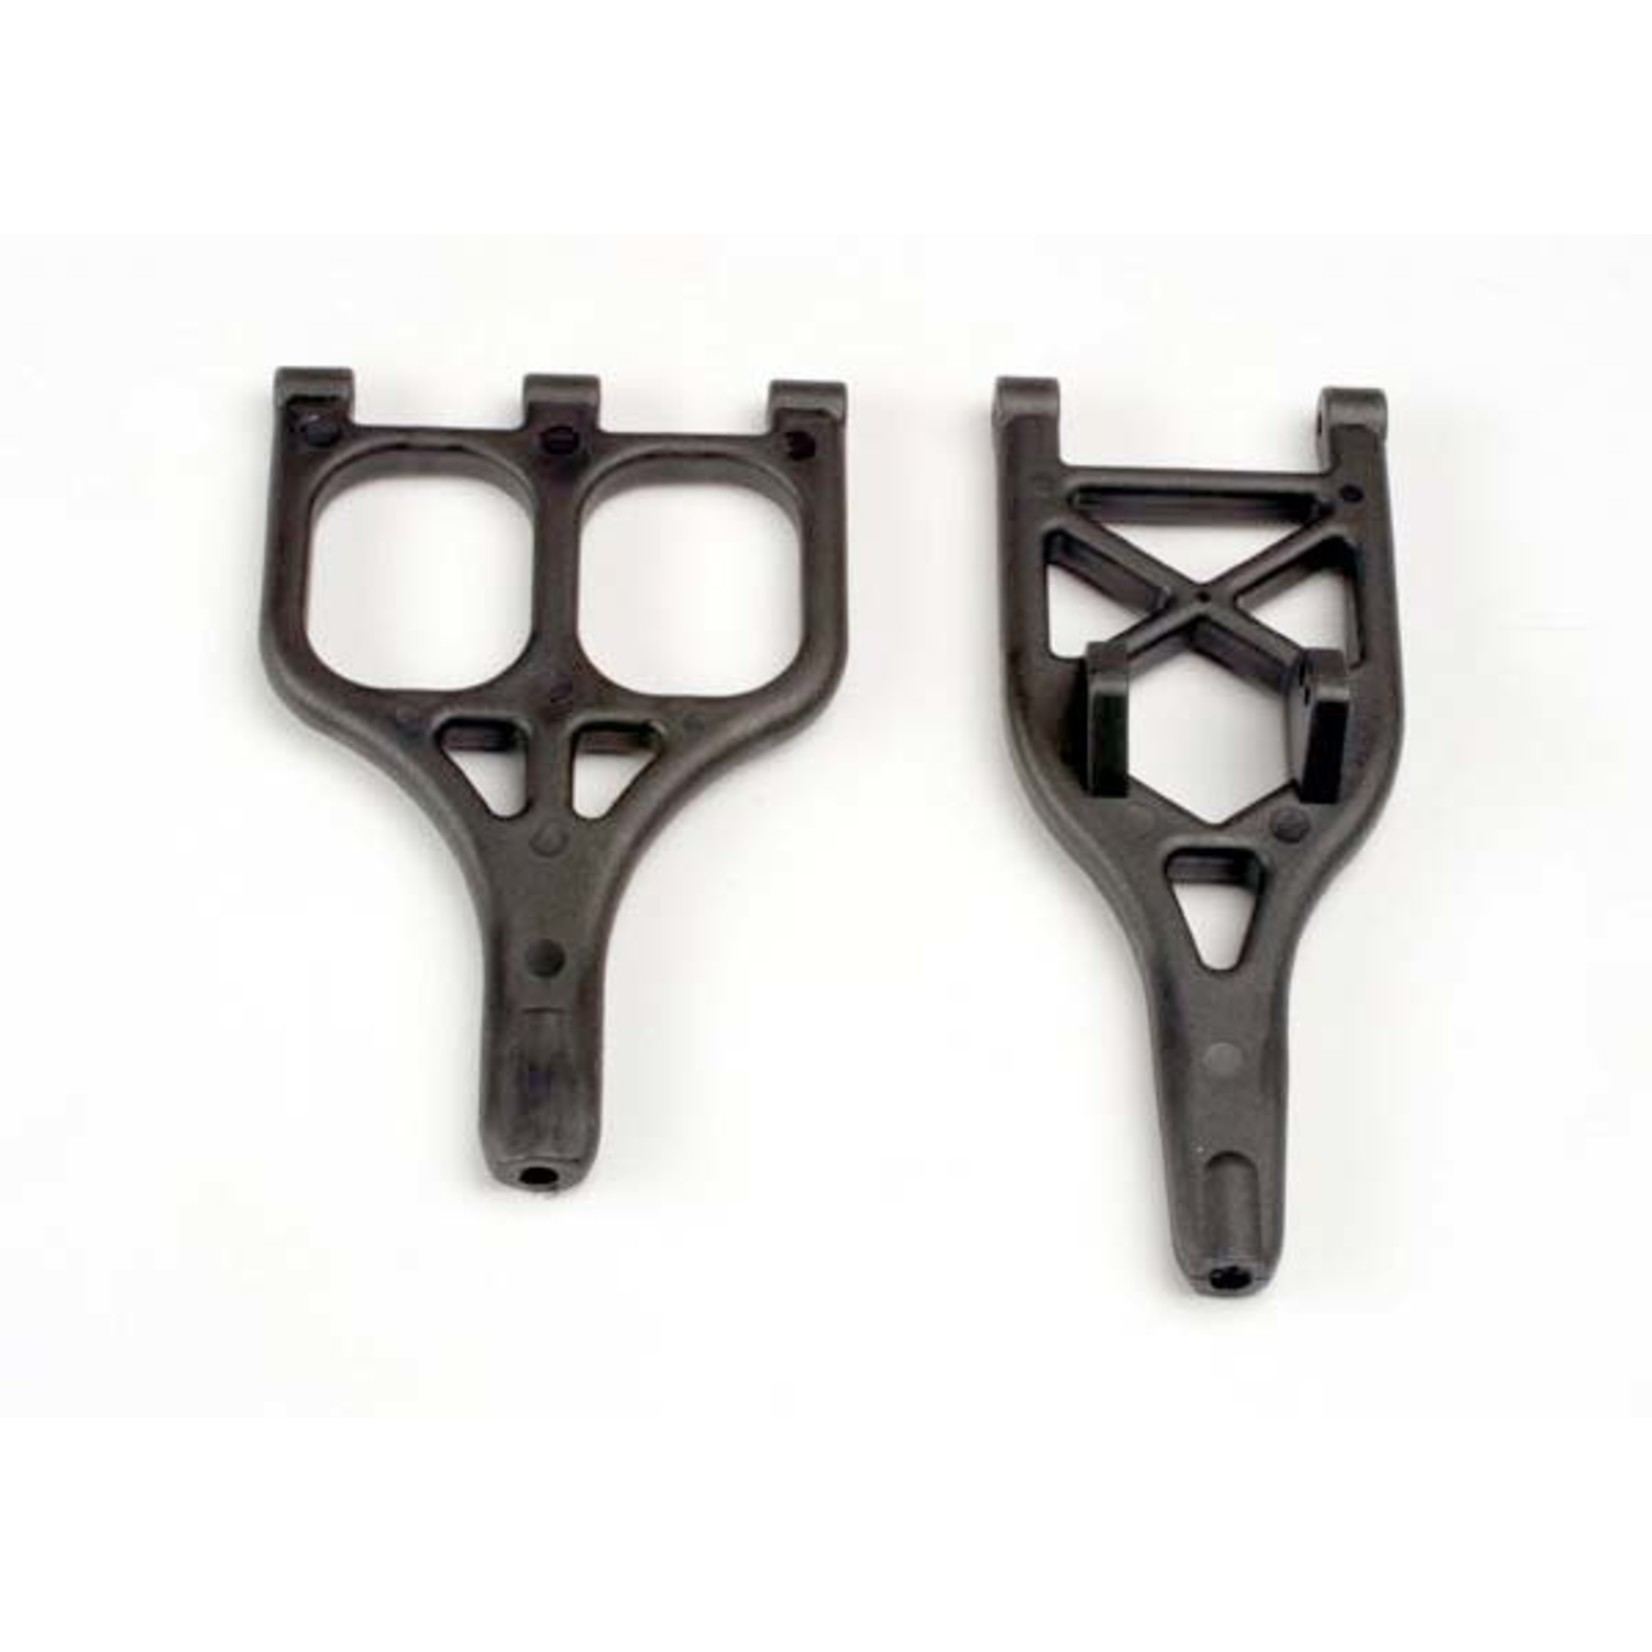 Traxxas 4931 - Suspension arms (upper/ lower) (1 each)